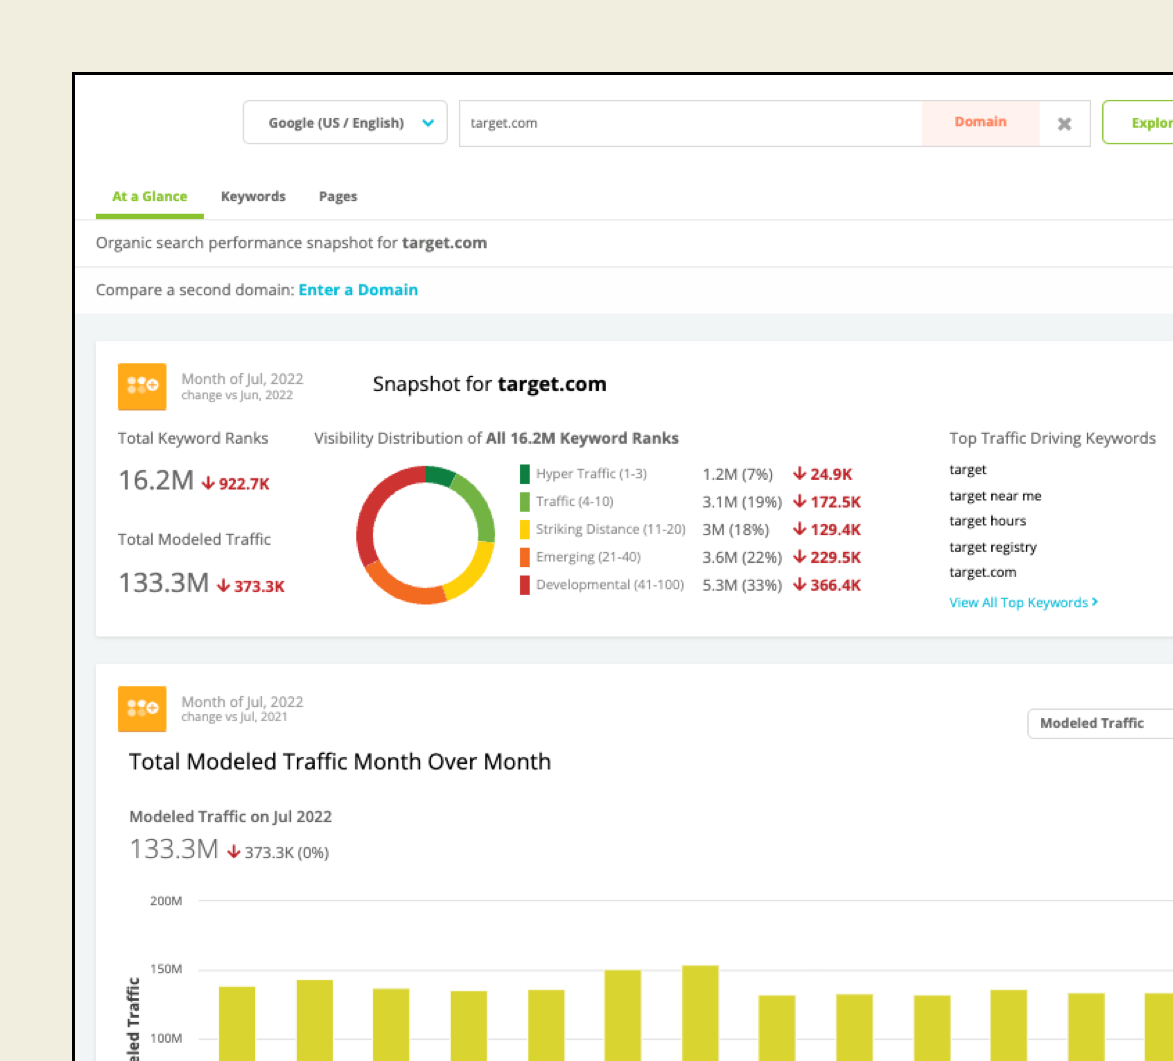 Platform's Explorer Feature Demonstrating Competitor Insights Including Strengths and Weaknesses